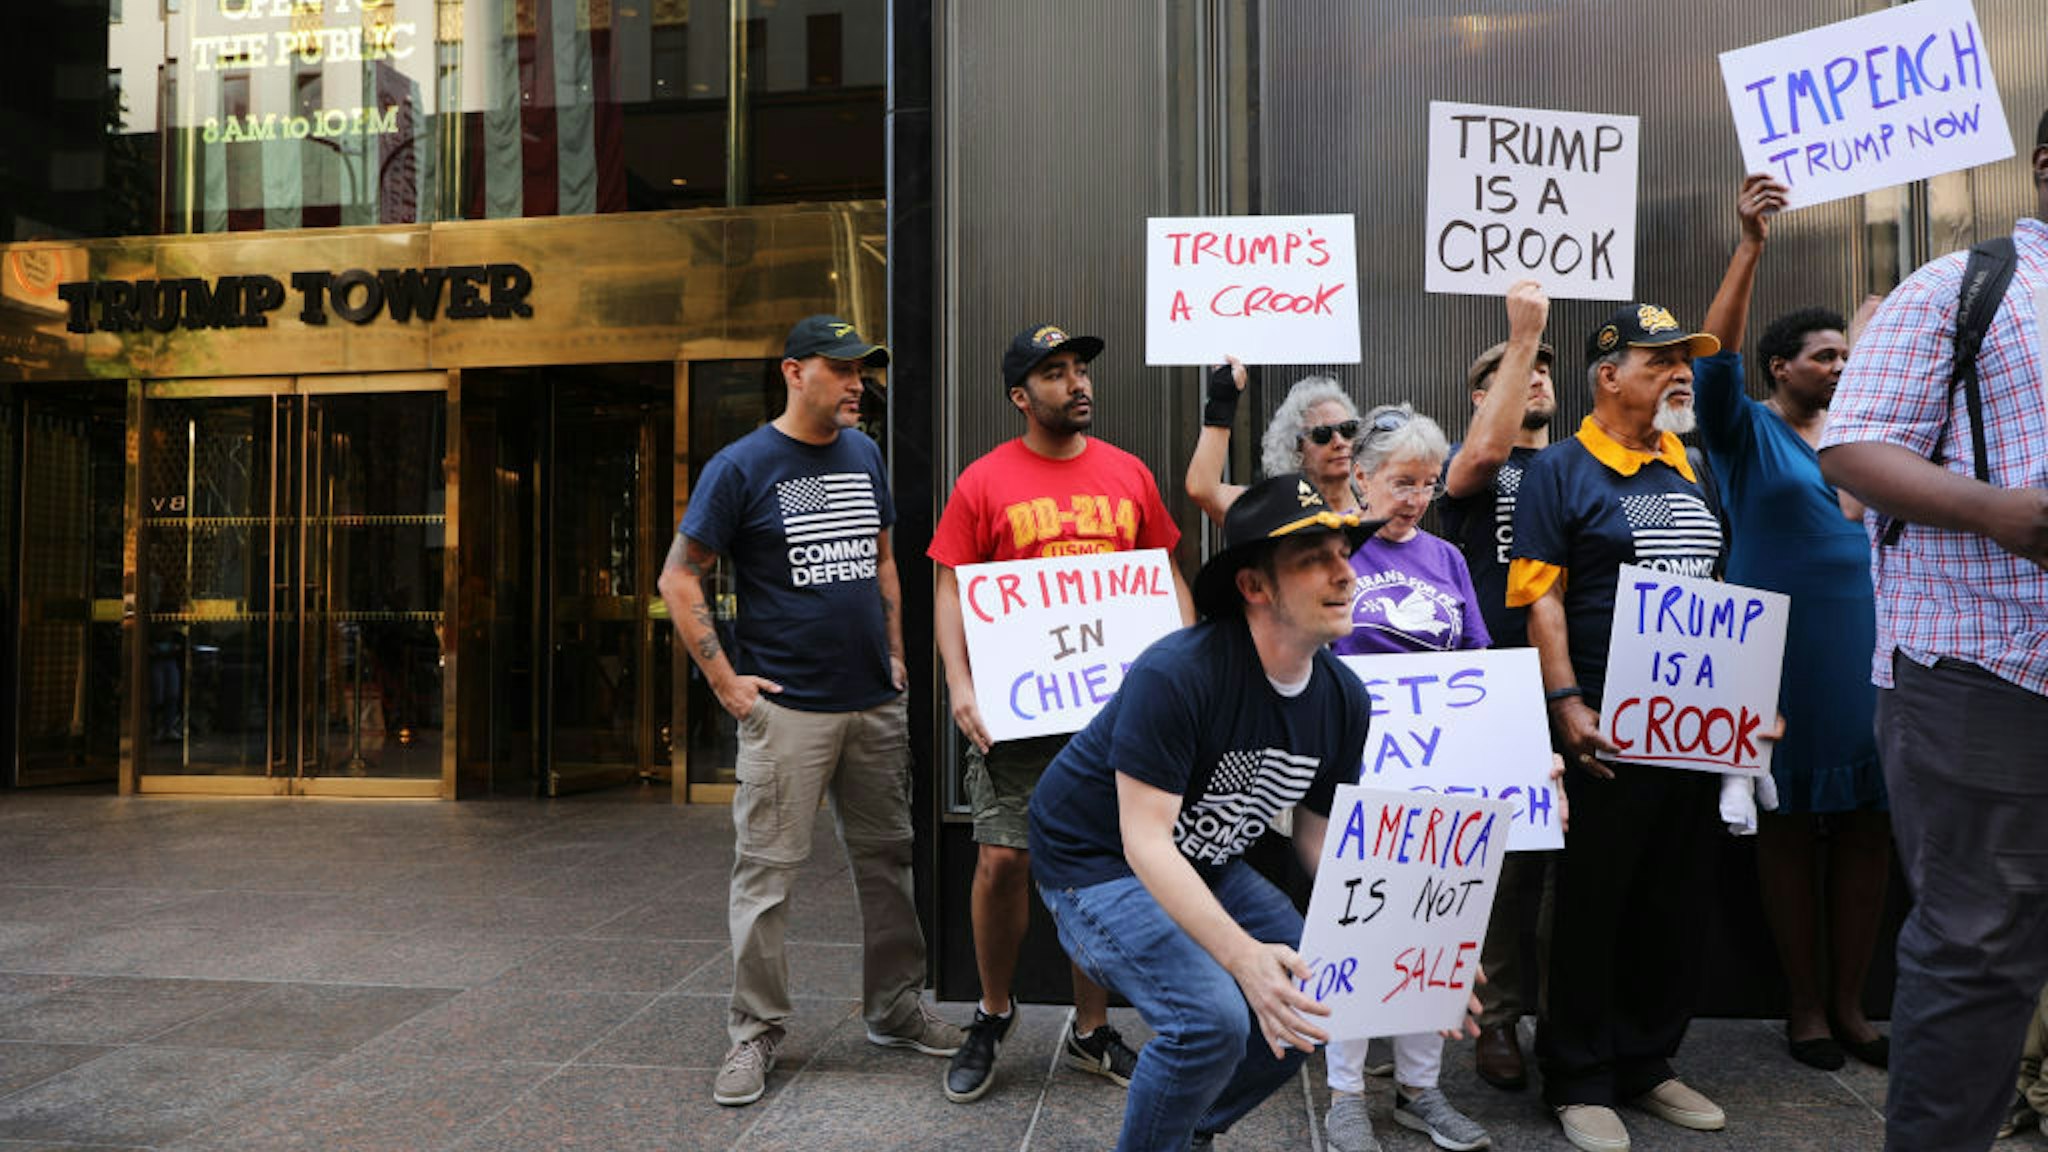 Members of a veterans group called Common Defense protest against President Donald Trump in front of Trump Tower on July 25, 2019 in New York City.